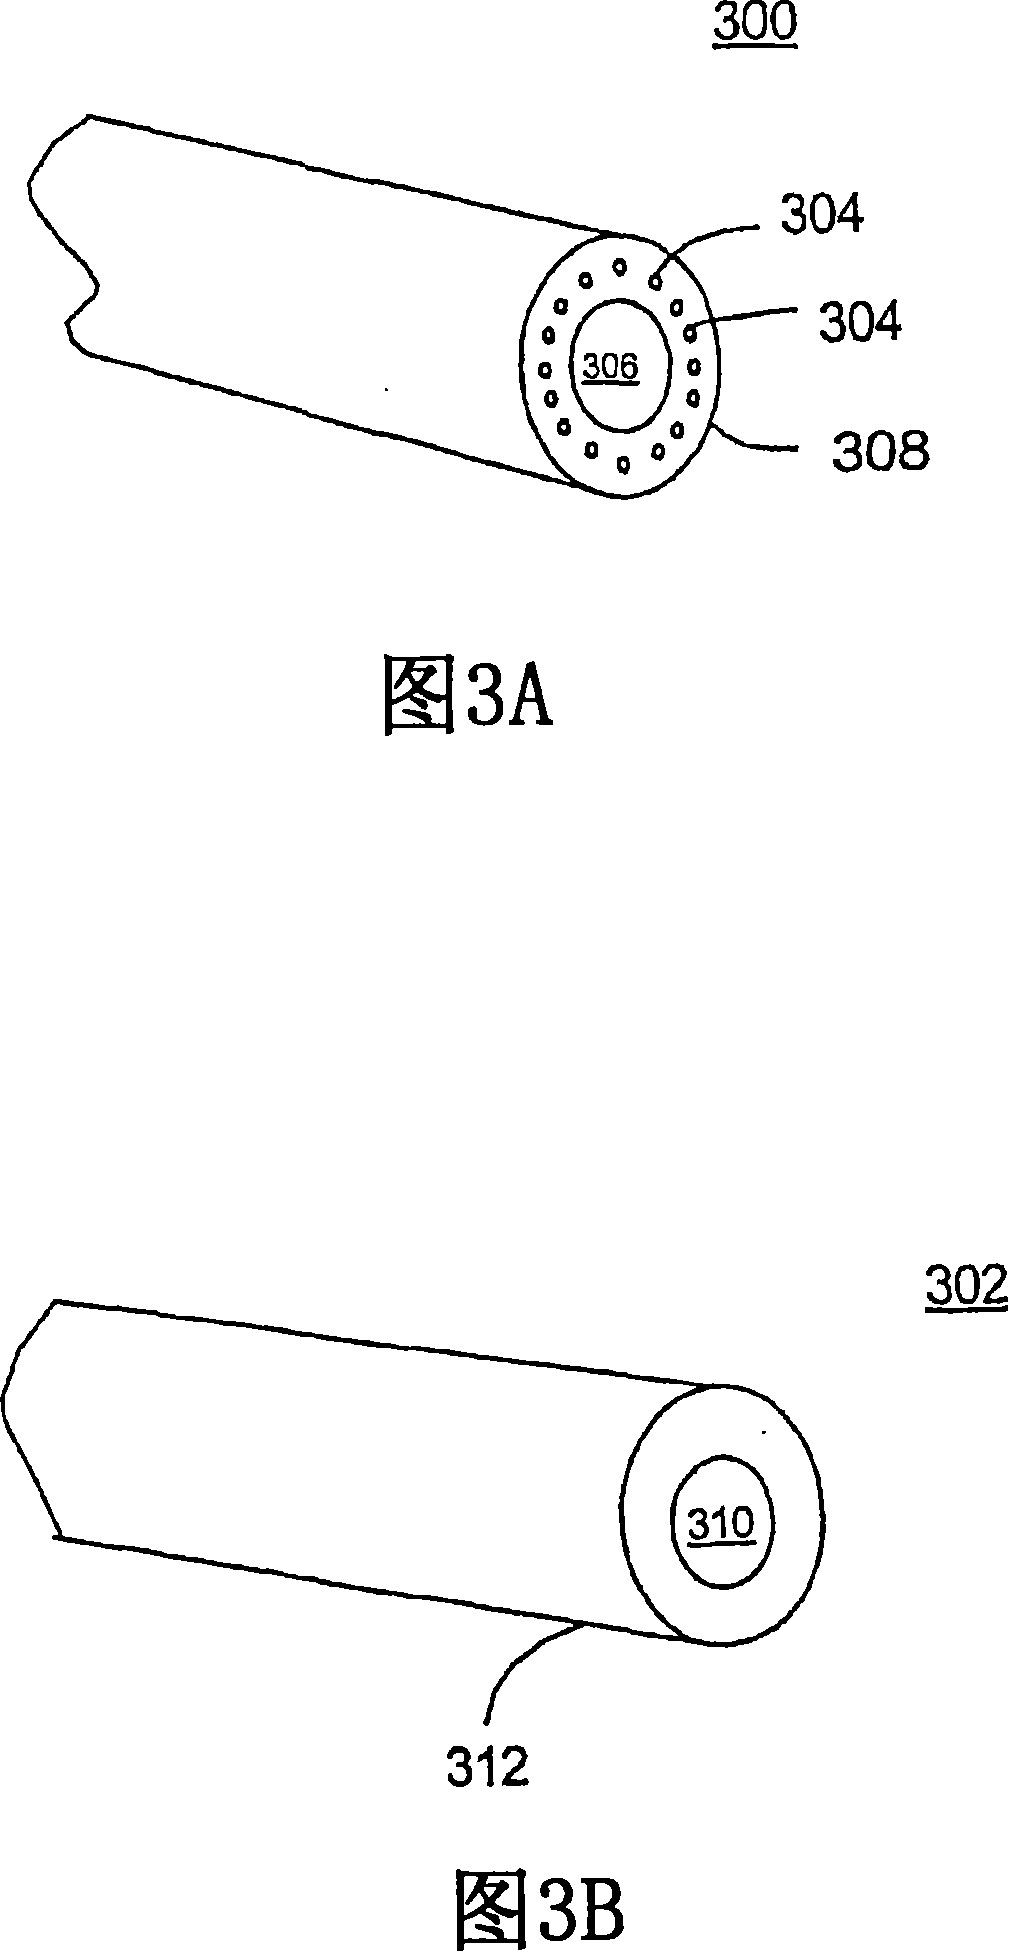 Cosmetic laser treatment device and method for localized lipodystrophies and flaccidity